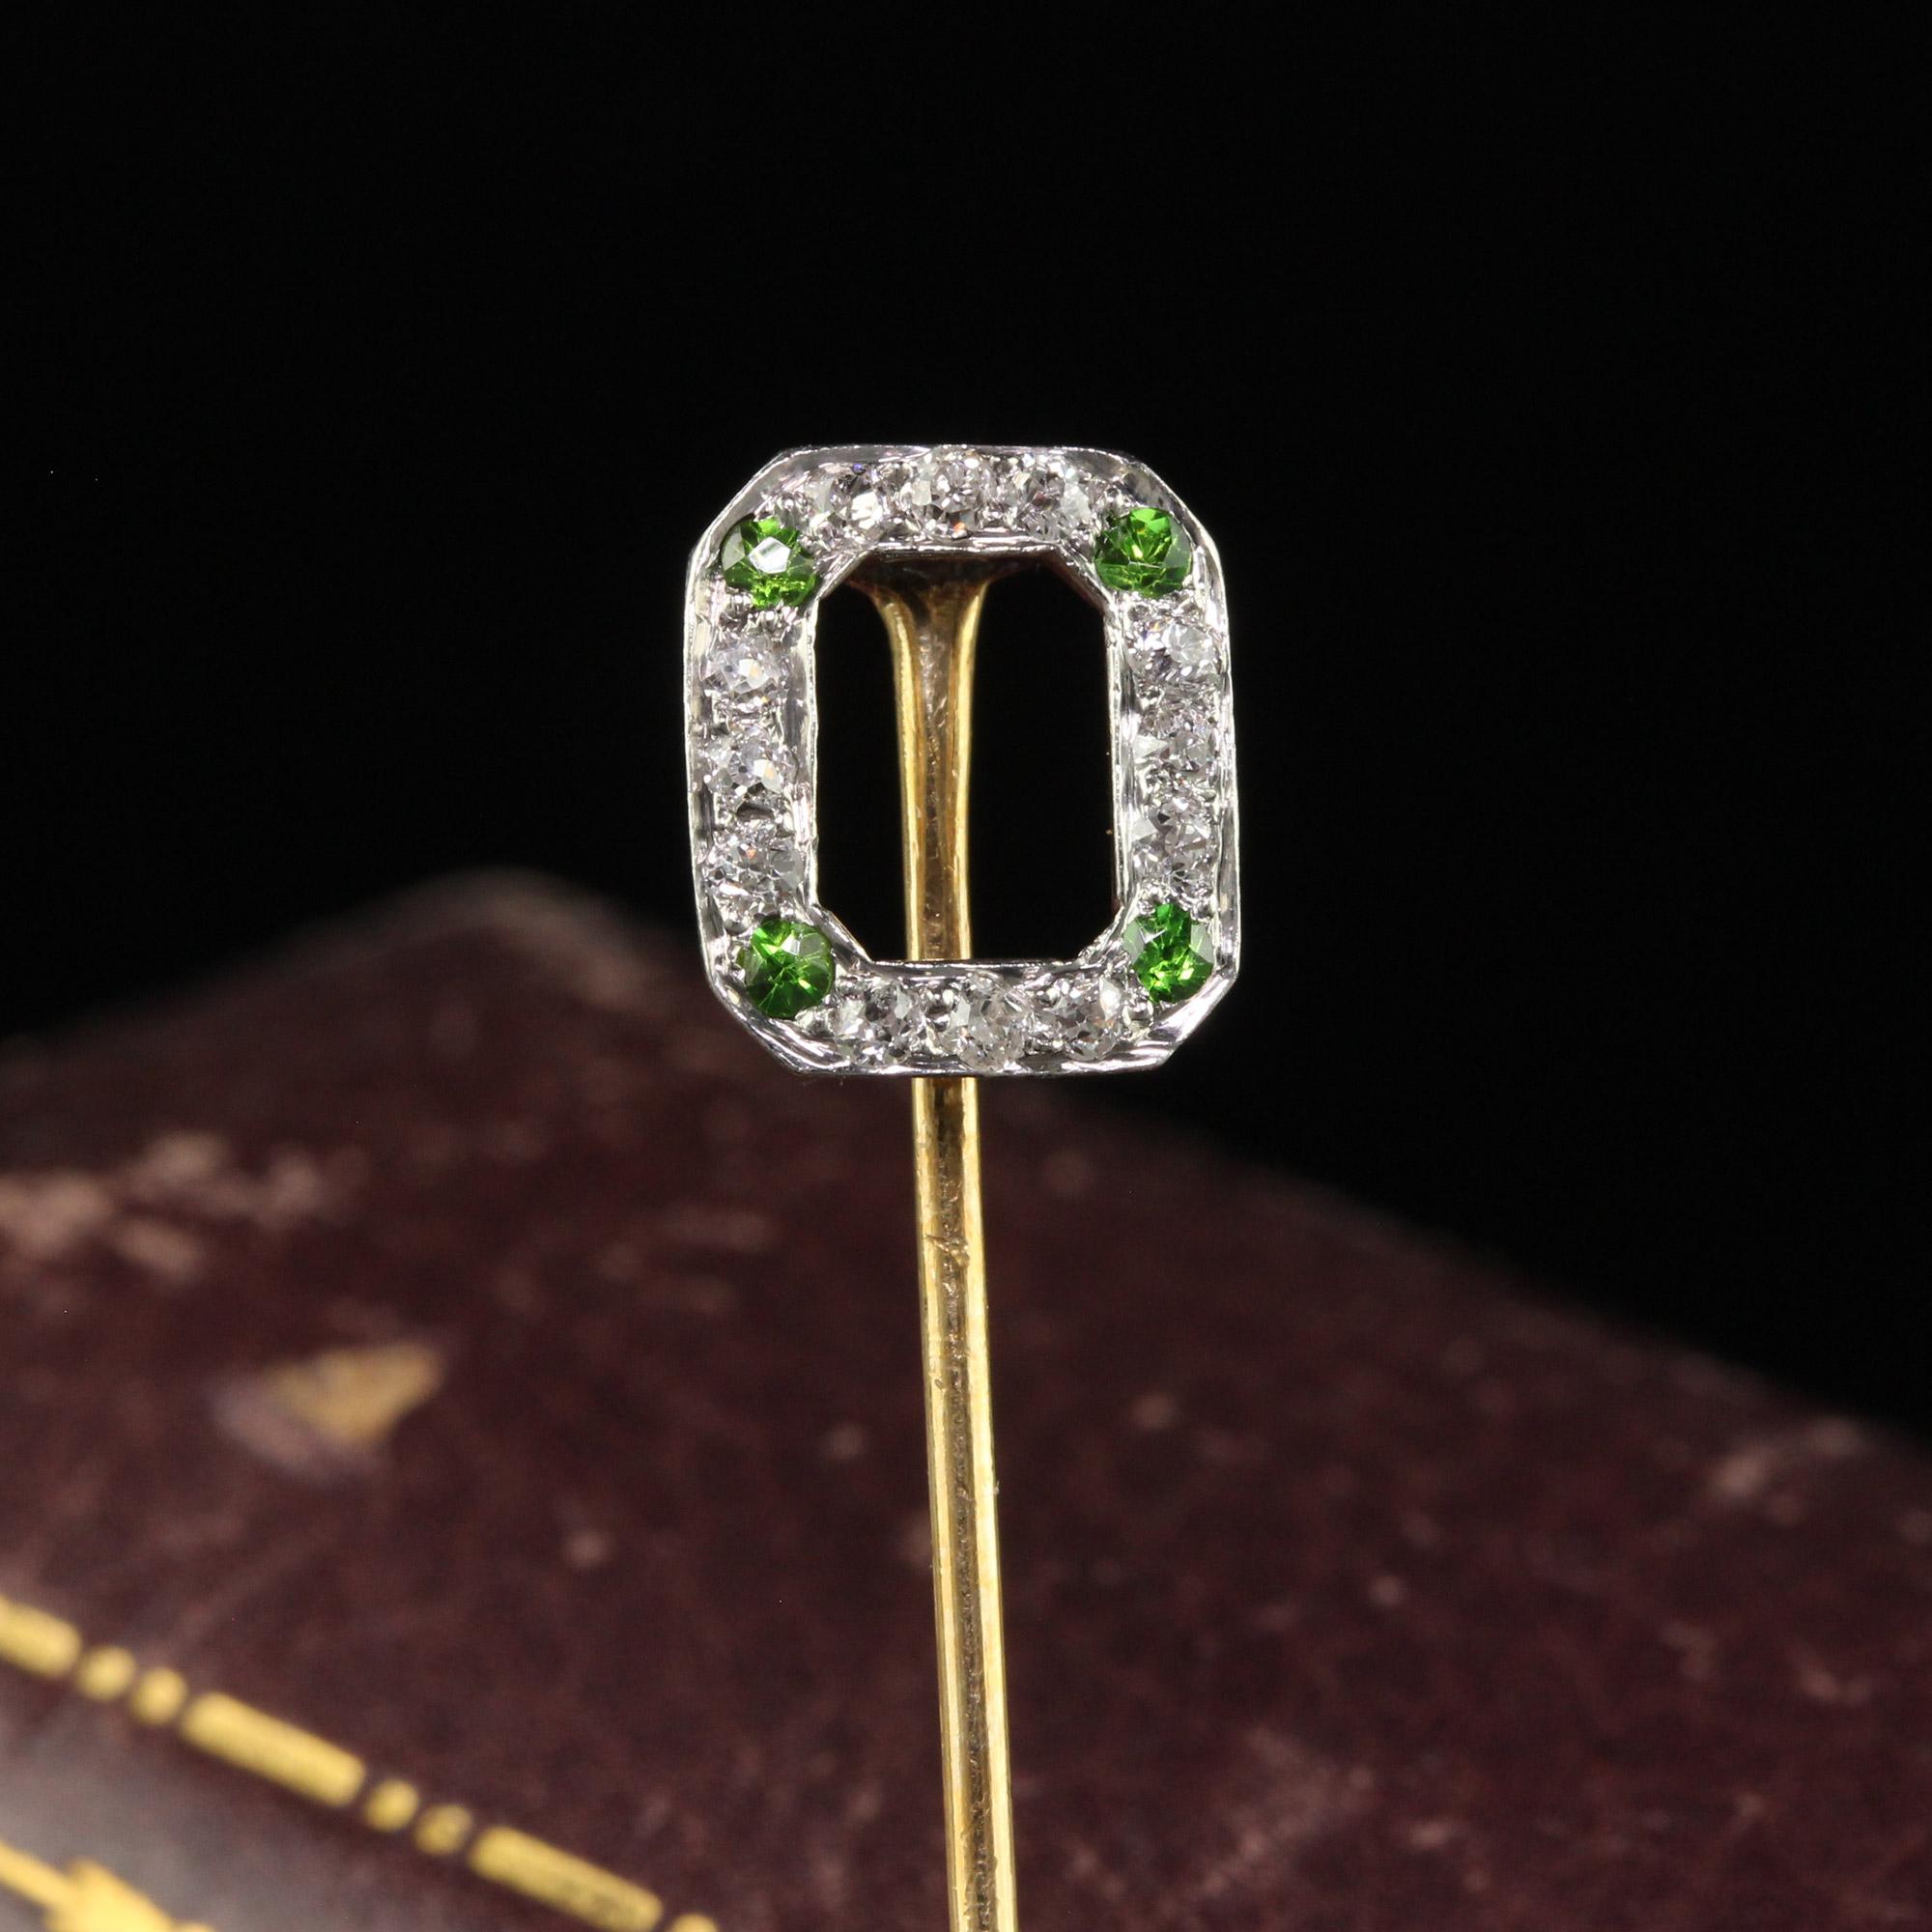 Beautiful Antique Art Deco 18K Yellow Gold Old Cut Diamond and Demantoid Stick Pin. This beautiful Art Deco stick pin is crafted in 18k yellow gold and platinum top. The pin features old cut diamonds and demantoid garnets on each corner. The pin has